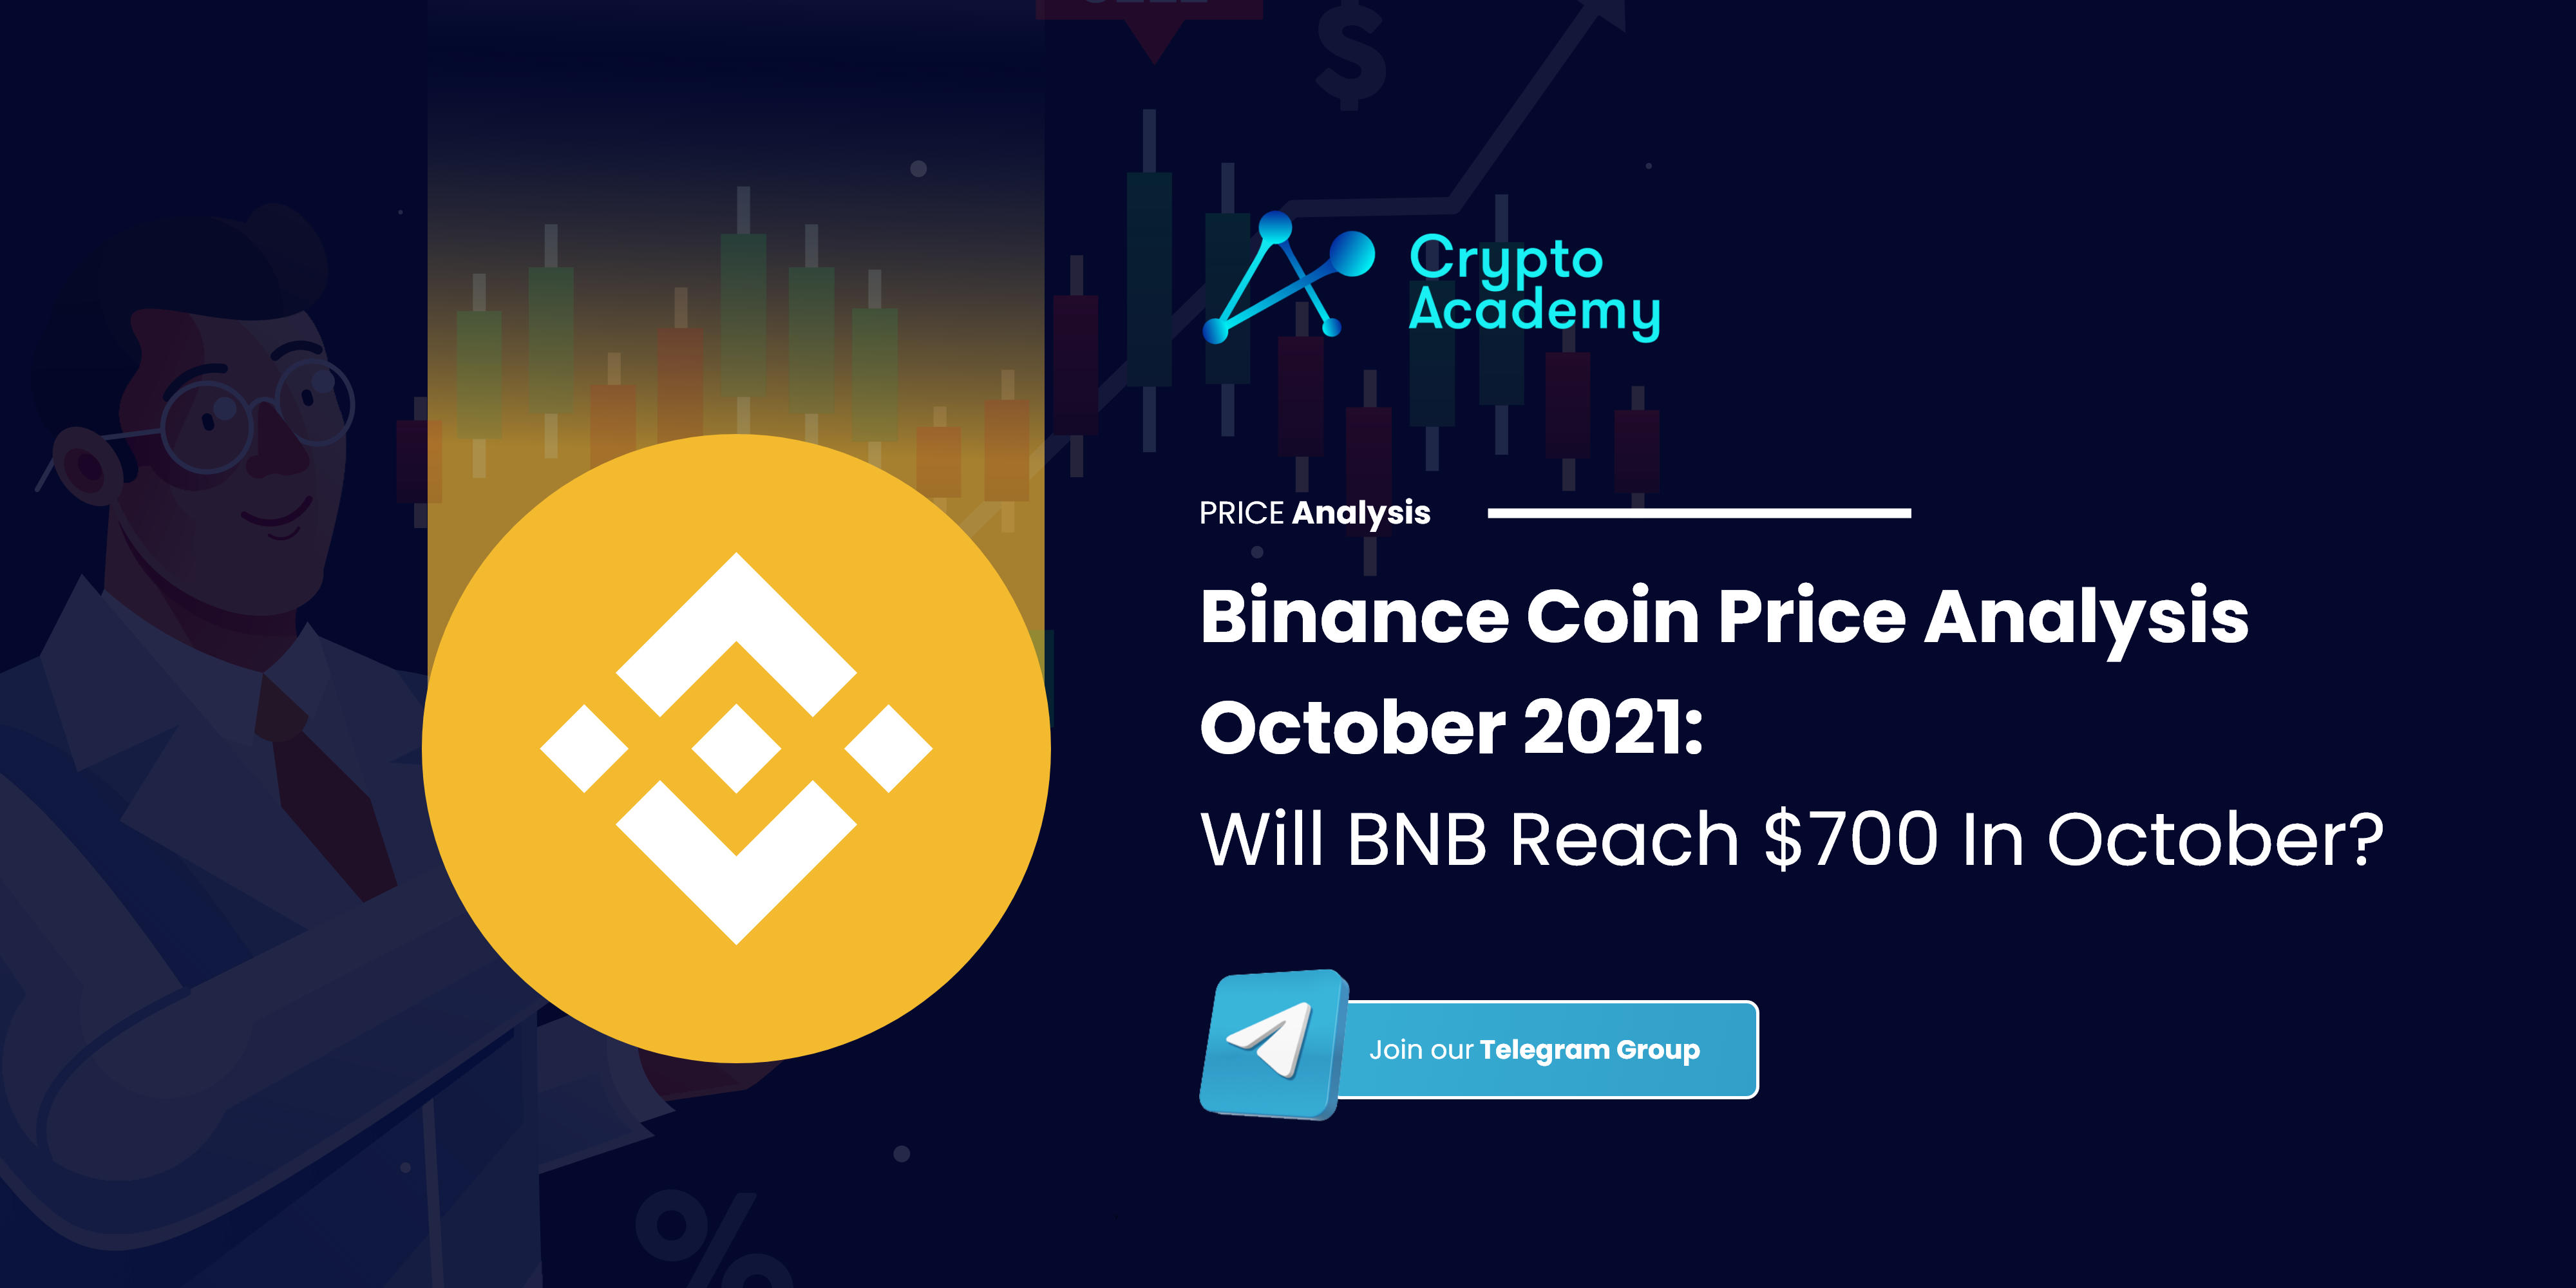 Binance Coin Price Analysis October 2021: Will BNB Reach $700 In October